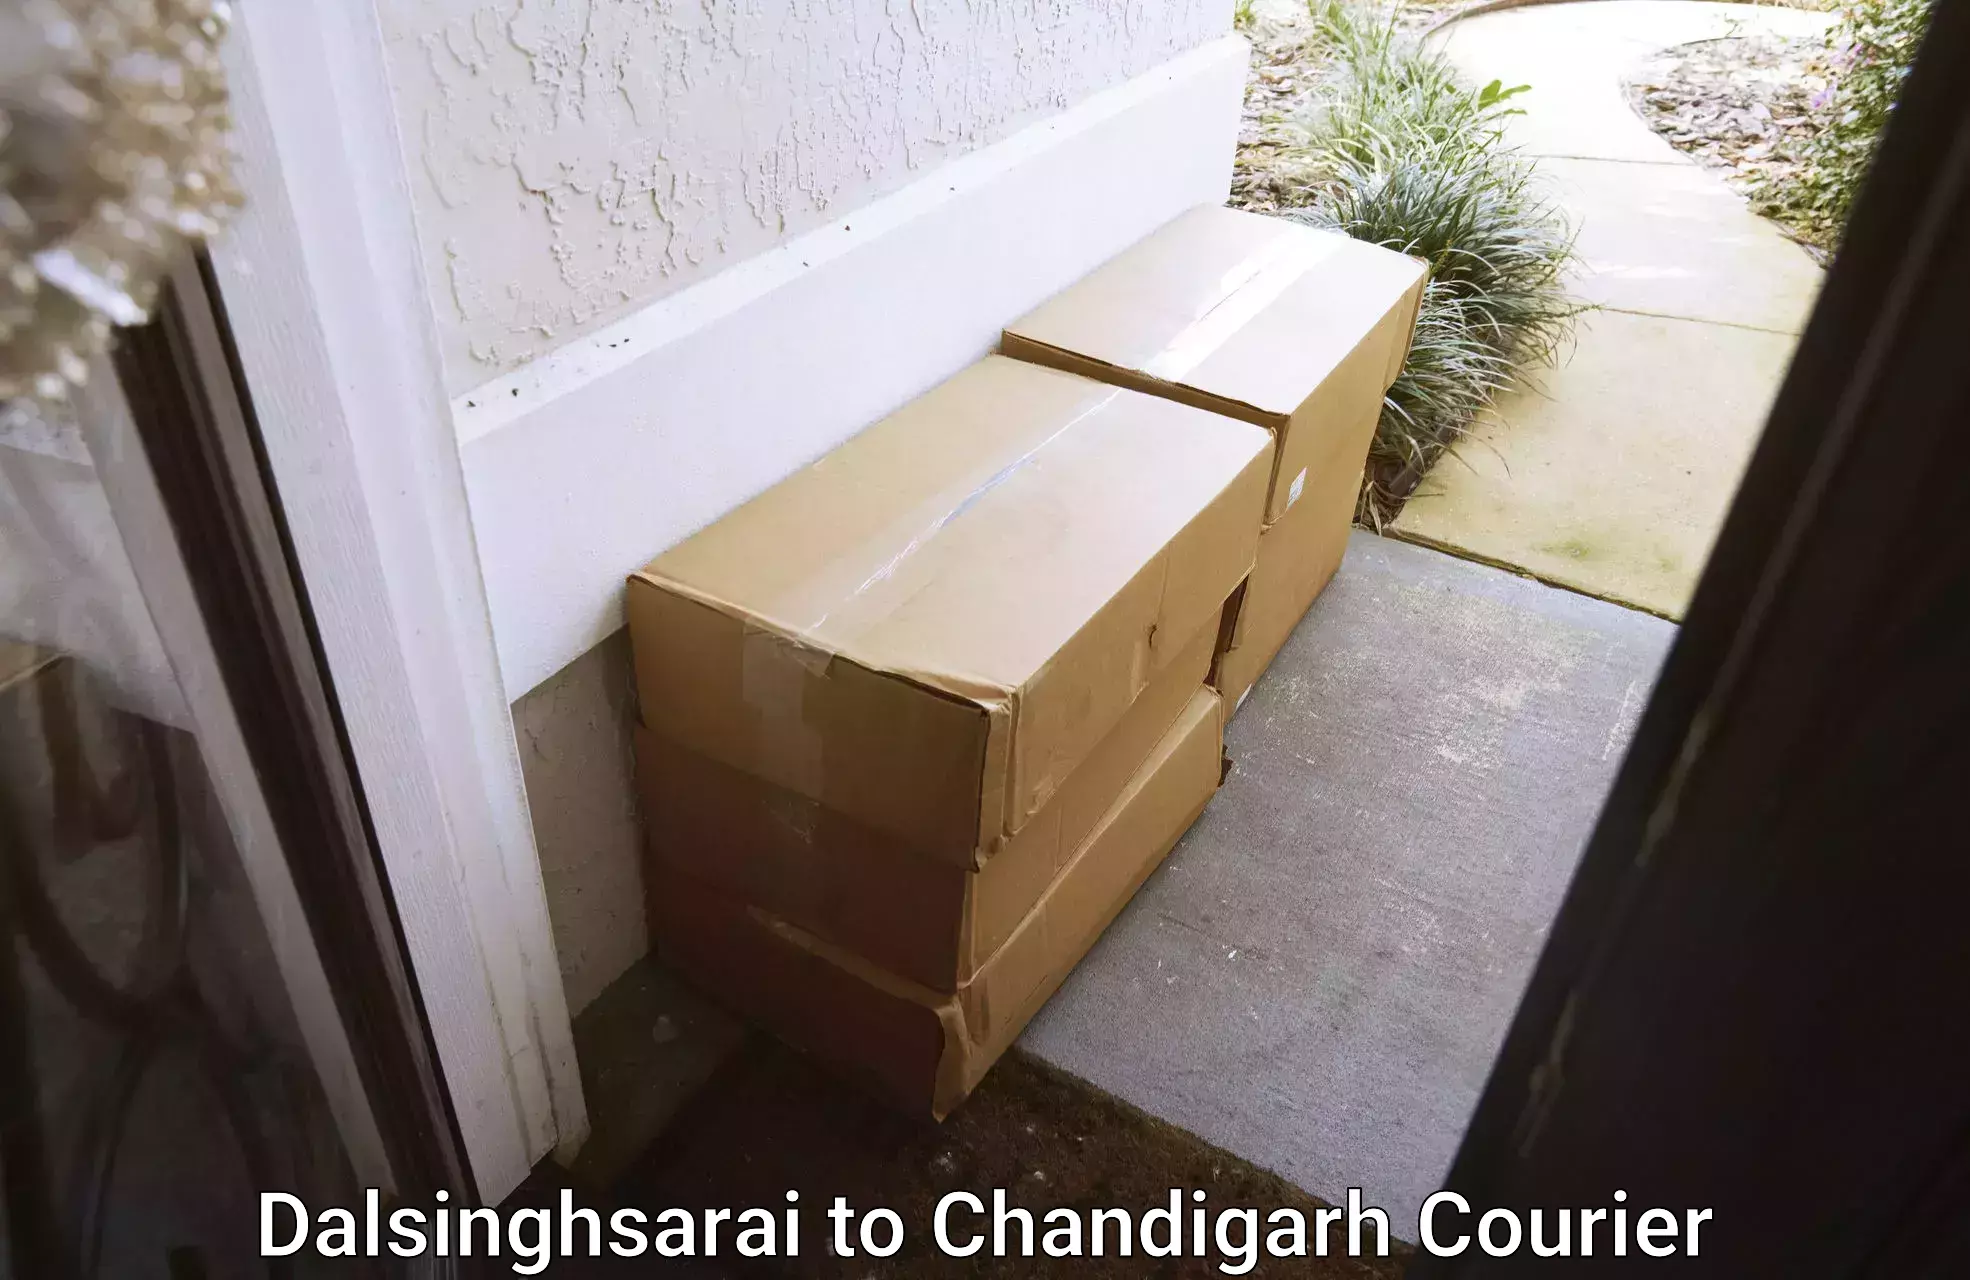 Quality moving and storage Dalsinghsarai to Chandigarh